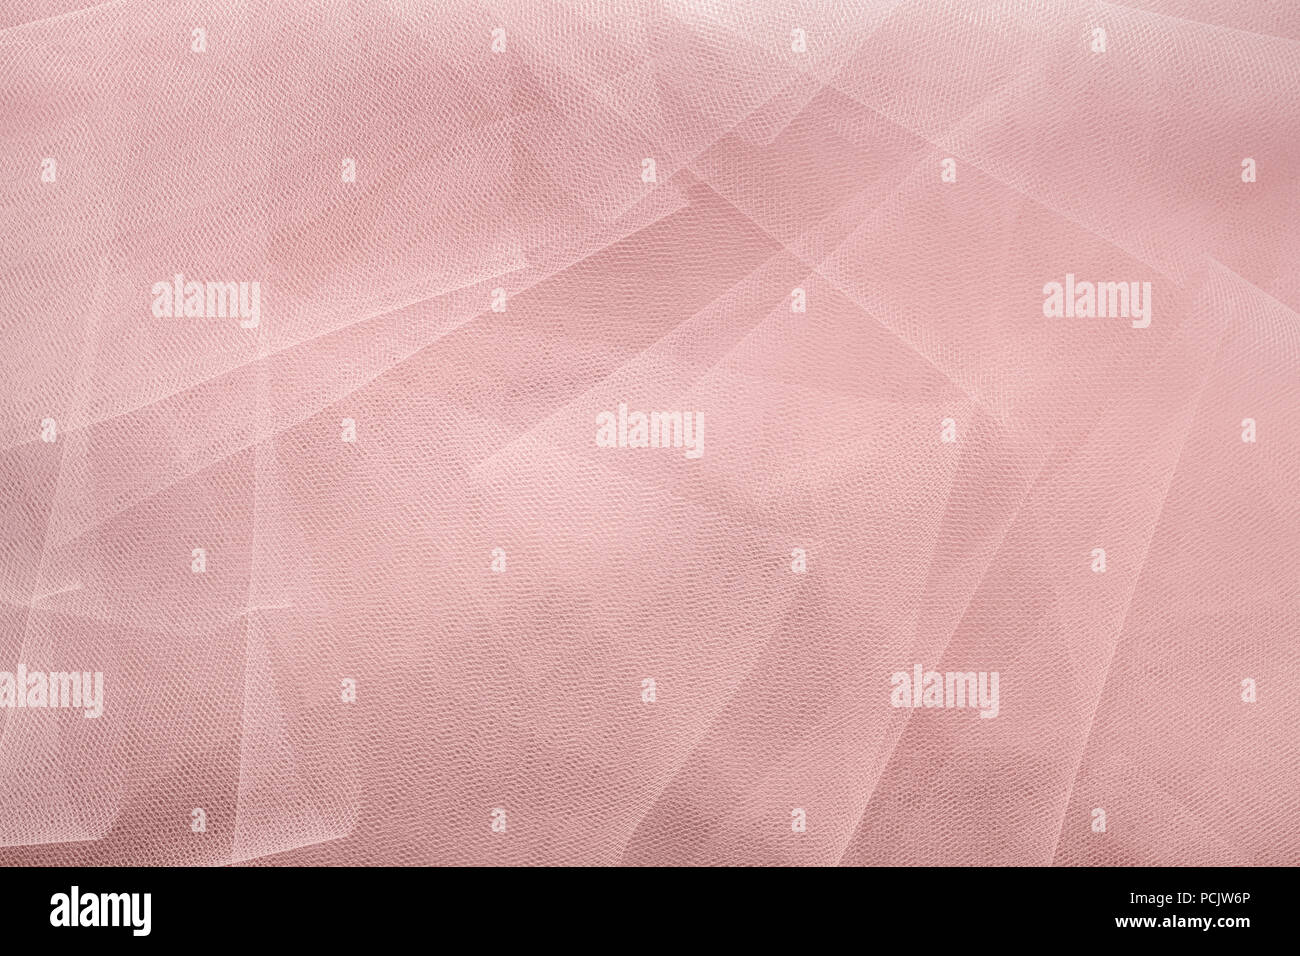 background with organza cloth texture Stock Photo